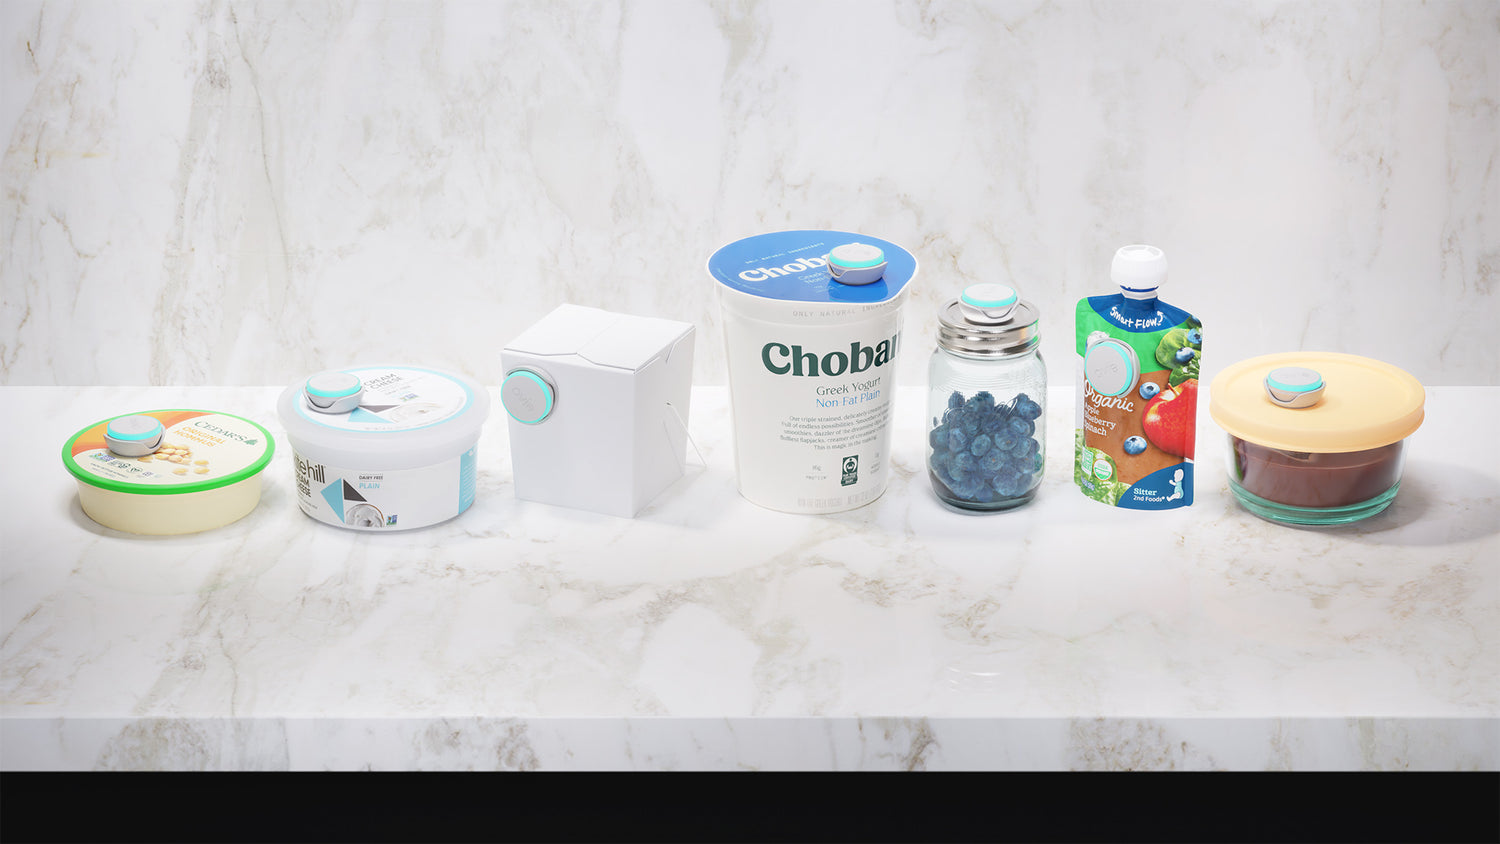 Image of 7 different food containers lined up on marble counter with marble backsplash. Each container from hummus to puree has an Ovie LightTag attached to it either on the top or the side